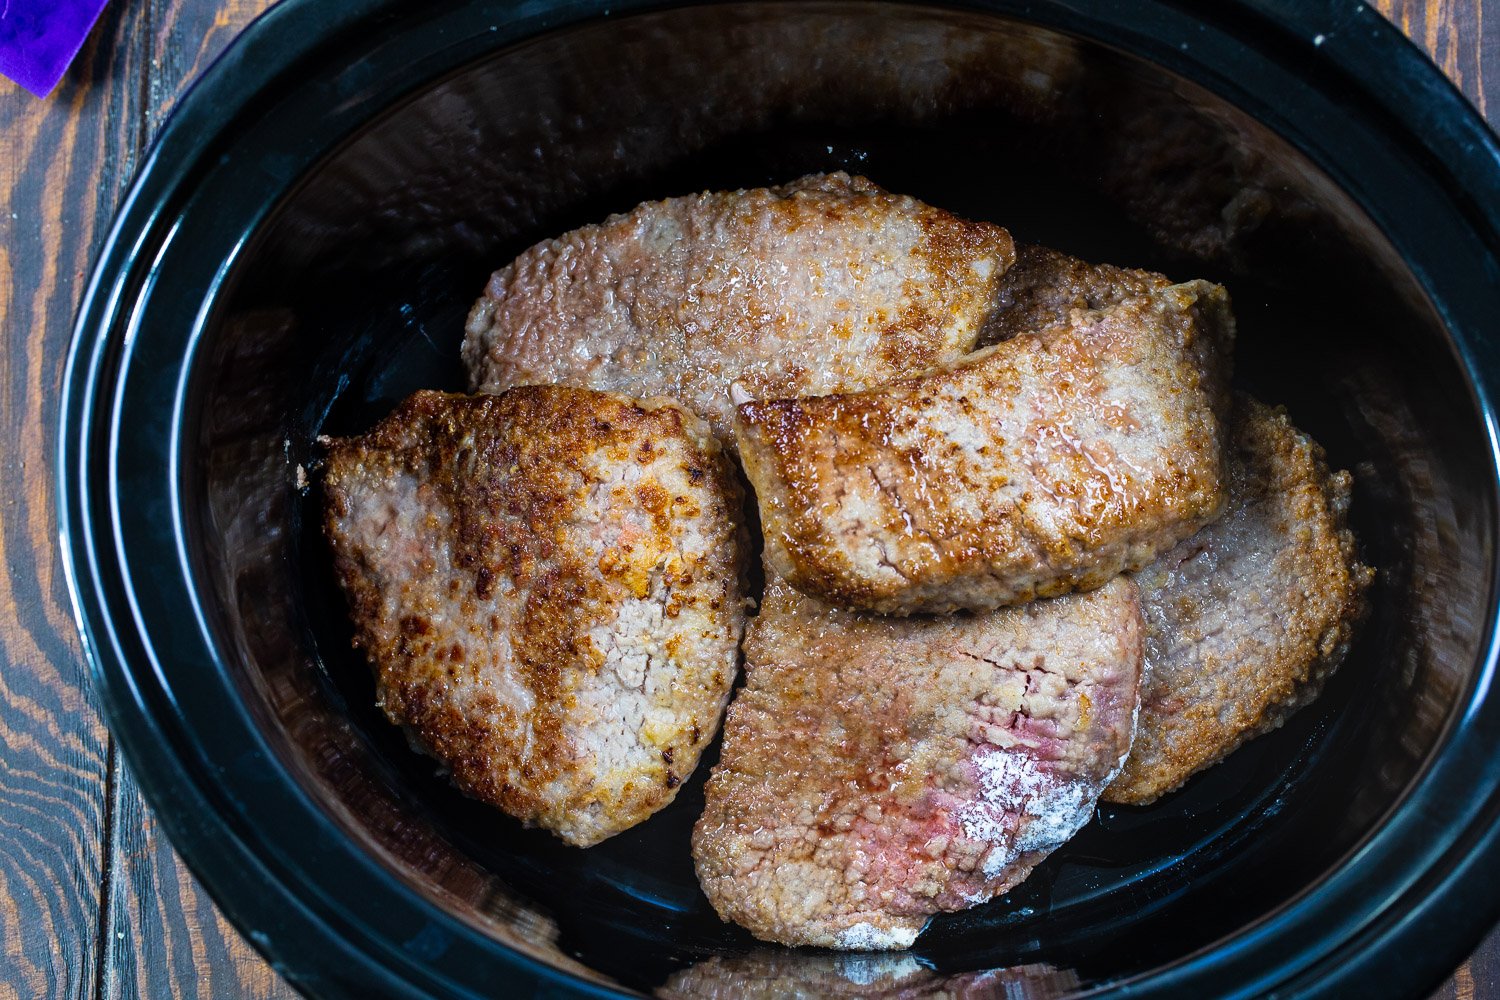 Browned pieces of cubed steak in slow cooker